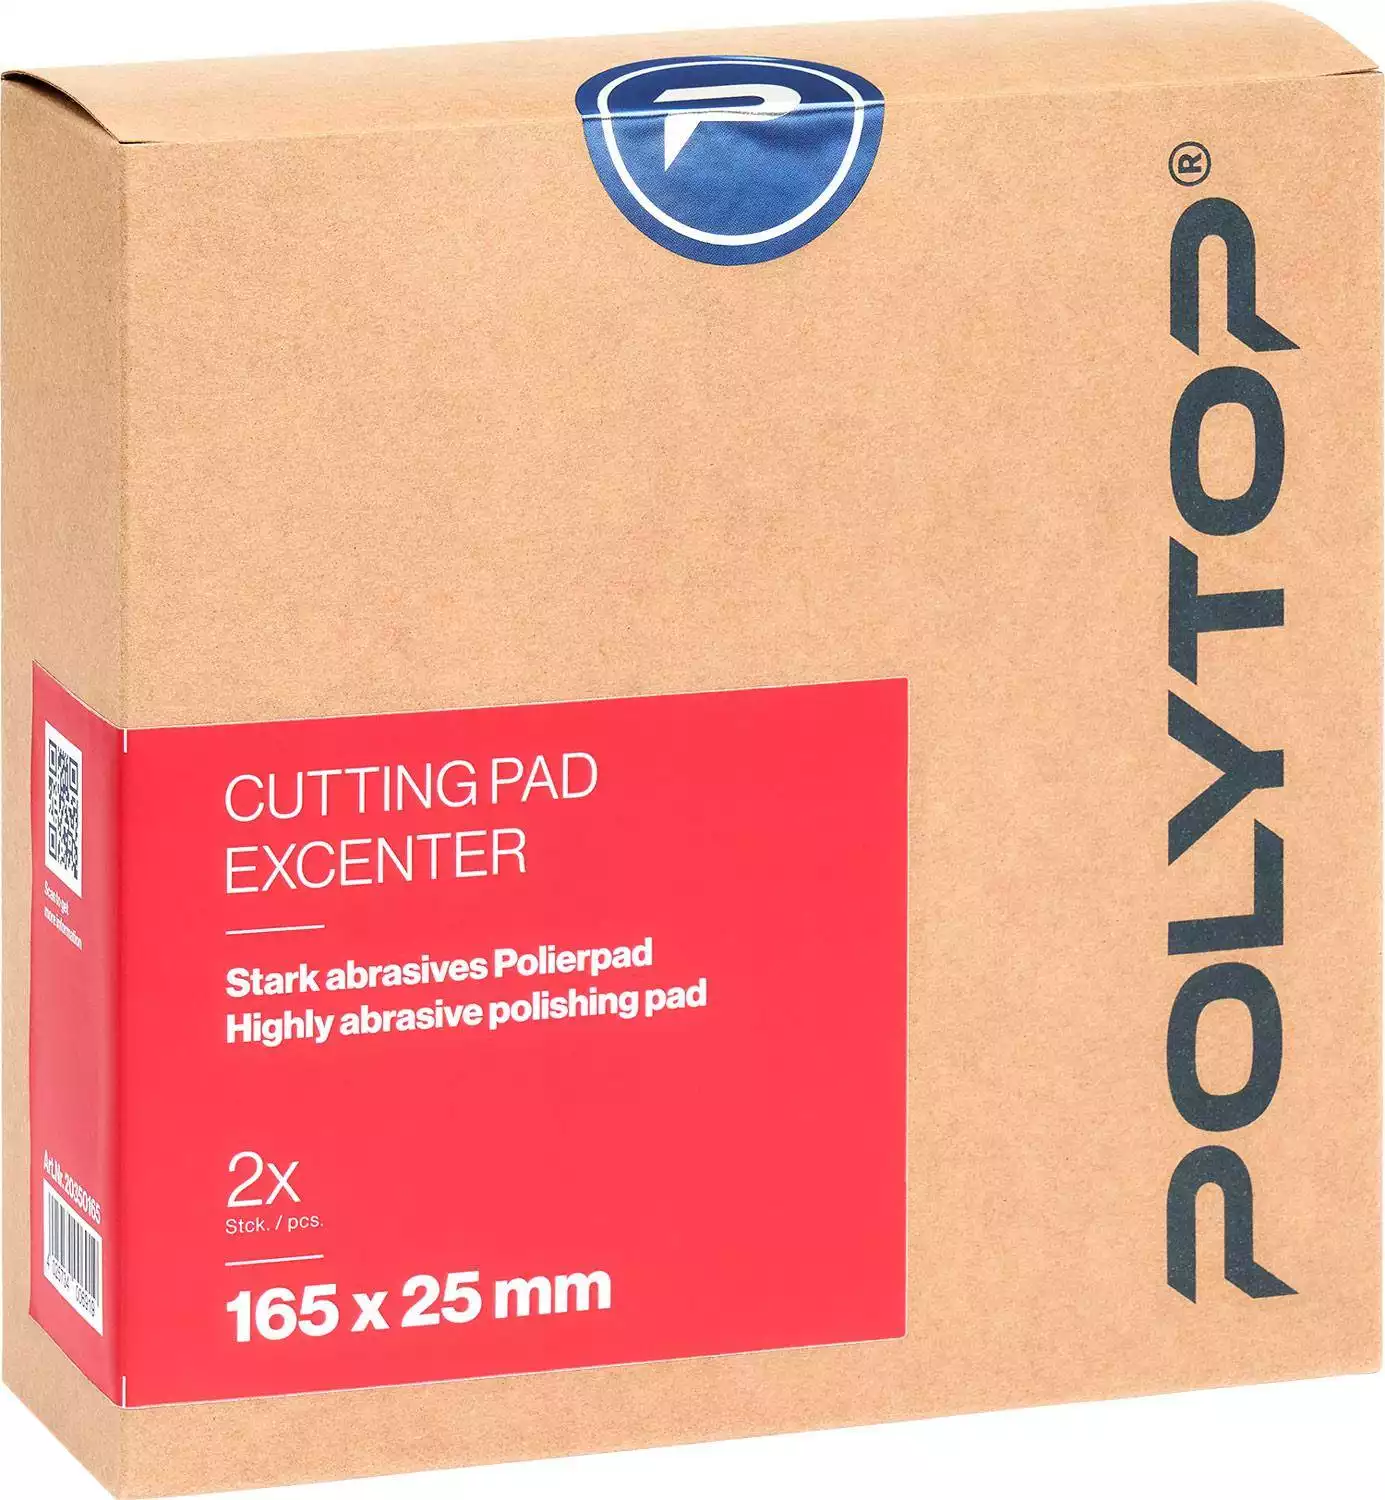 Cutting Pad rot Excenter 165 x 25 mm, 2er Pack